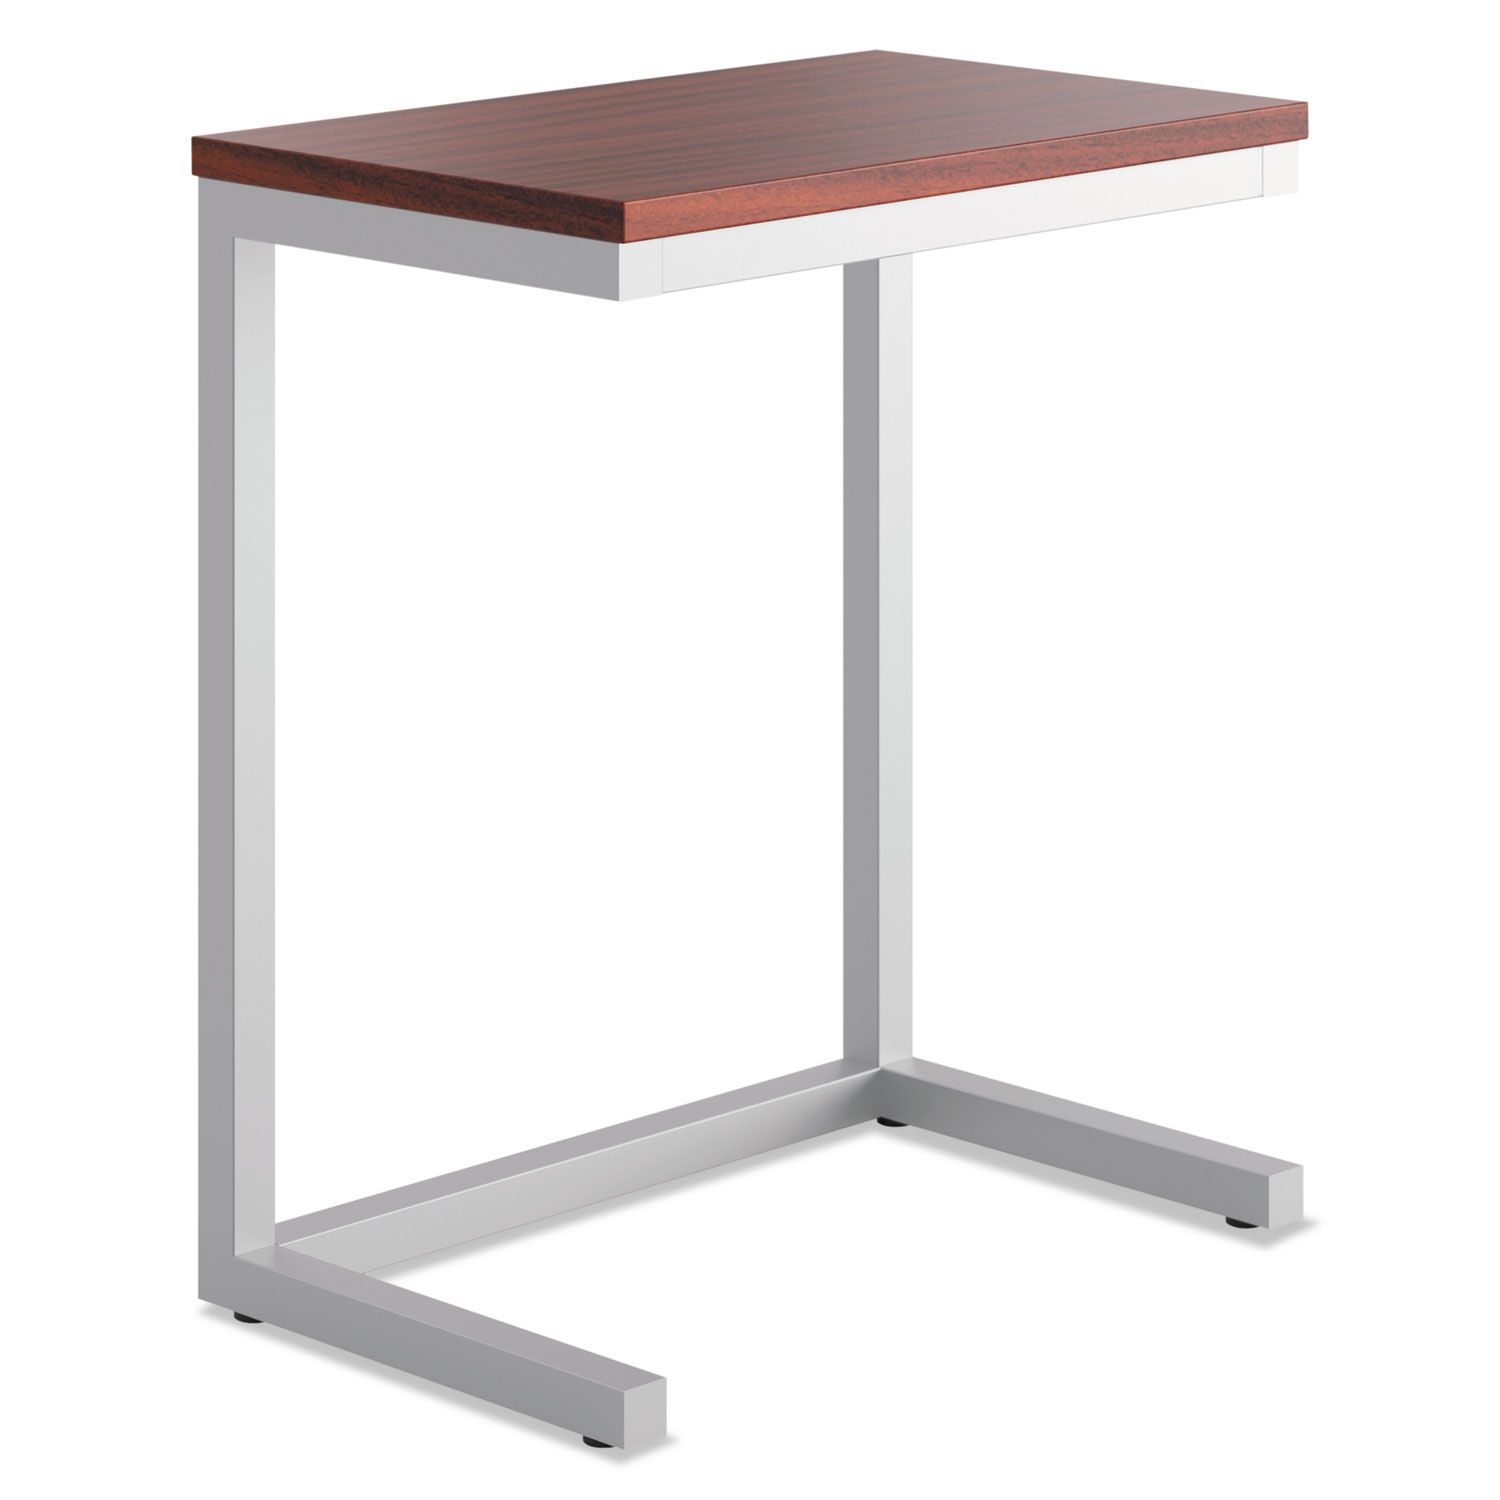 Occasional Cantilever Table, 24w x 15d x 20 3/4h, Chestnut/Silver